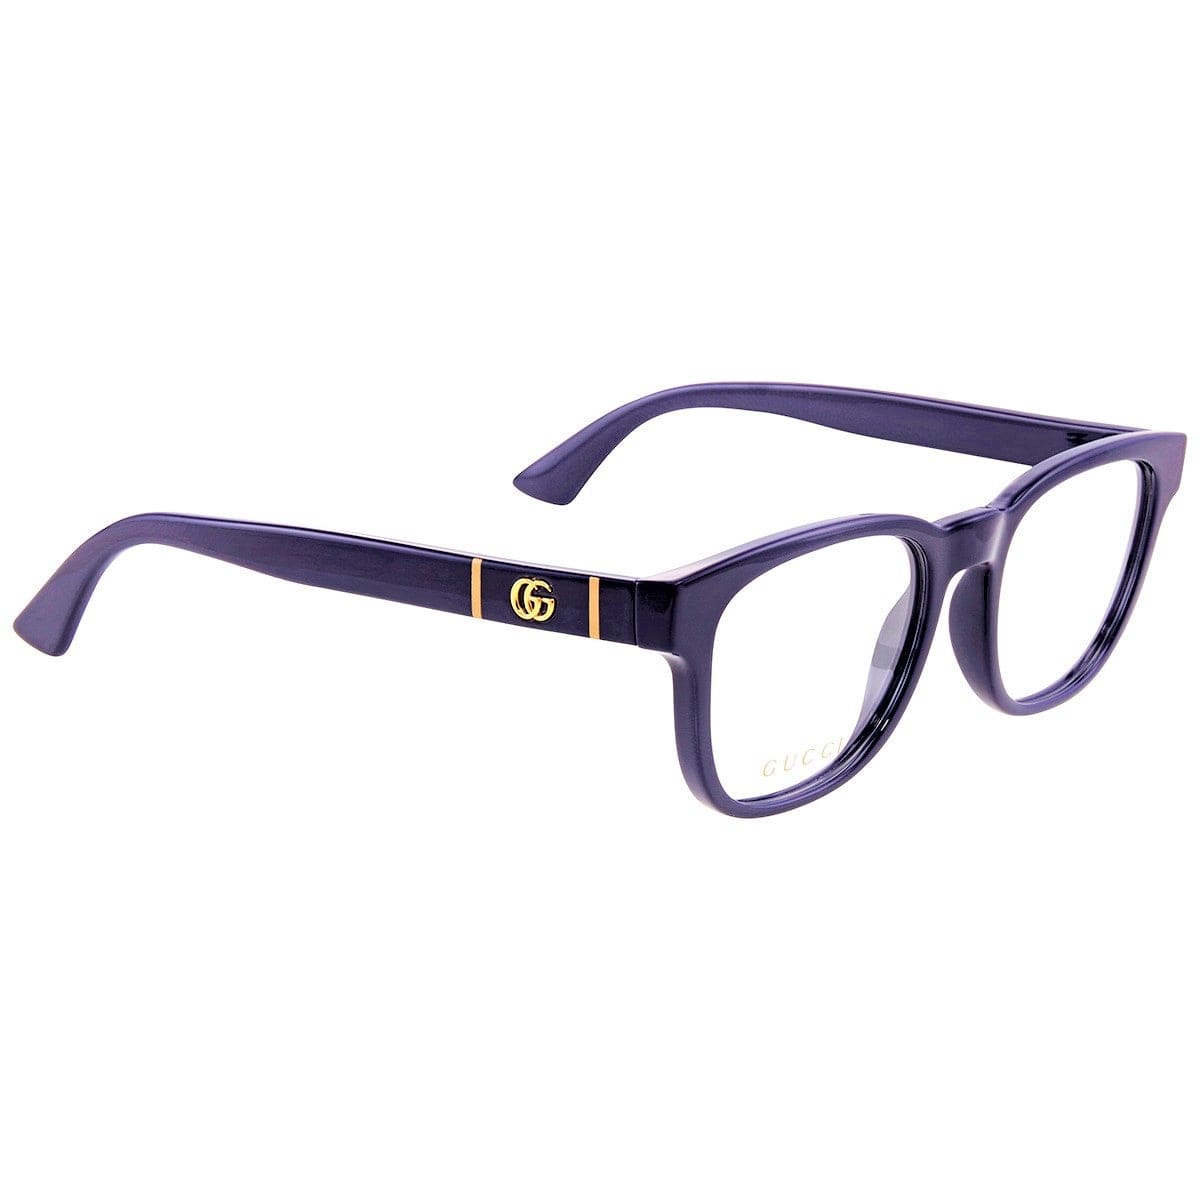 Gucci GG0764O-003 Round / Oval Blue Frame Clear Lens 